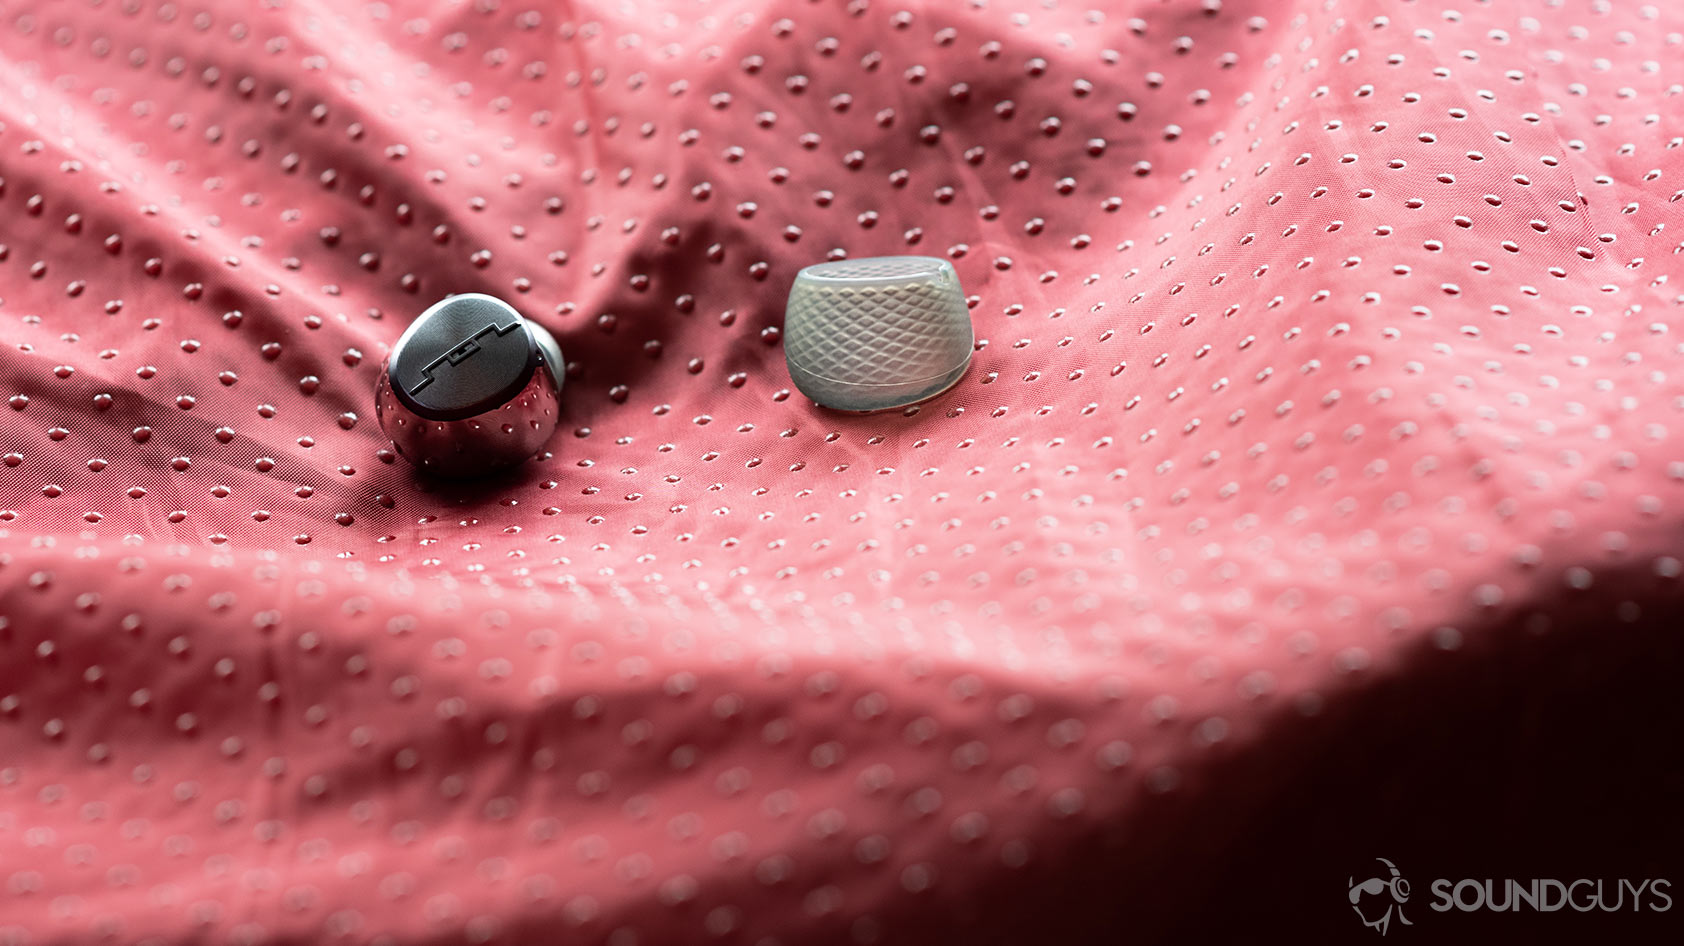 A photo of the Sol Republic Amps Air Plus true wireless noise canceling earbud with the silicone sleeve removed from the housing.